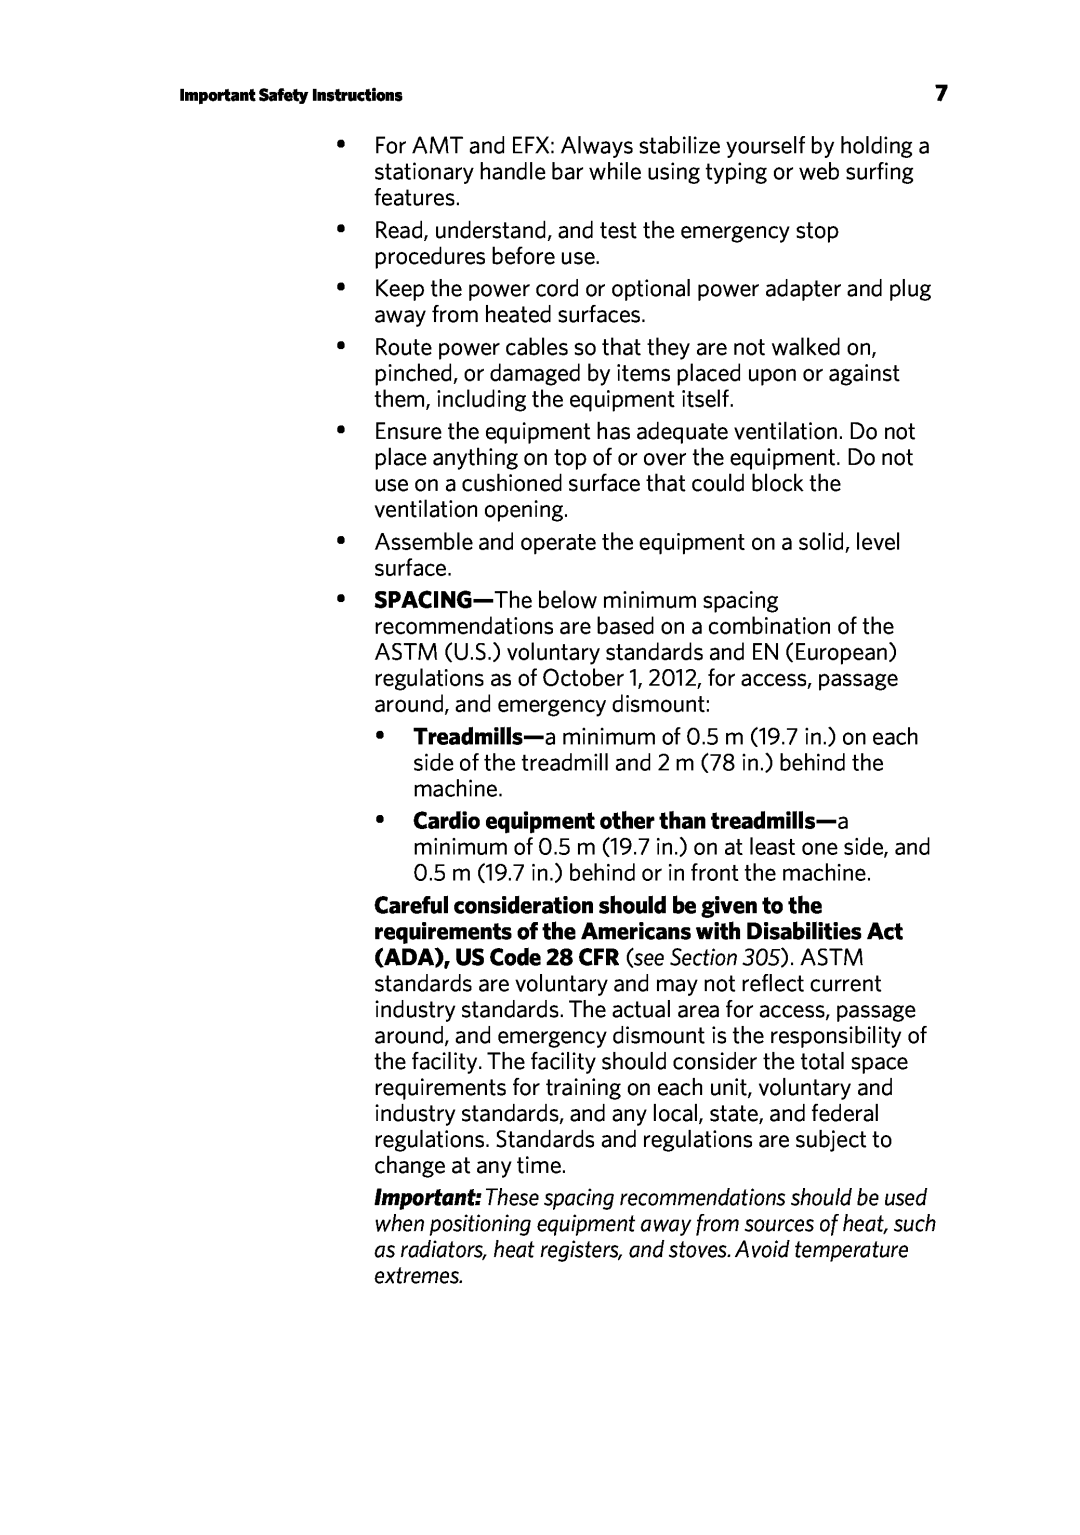 Precor P80 manual Important Safety Instructions 